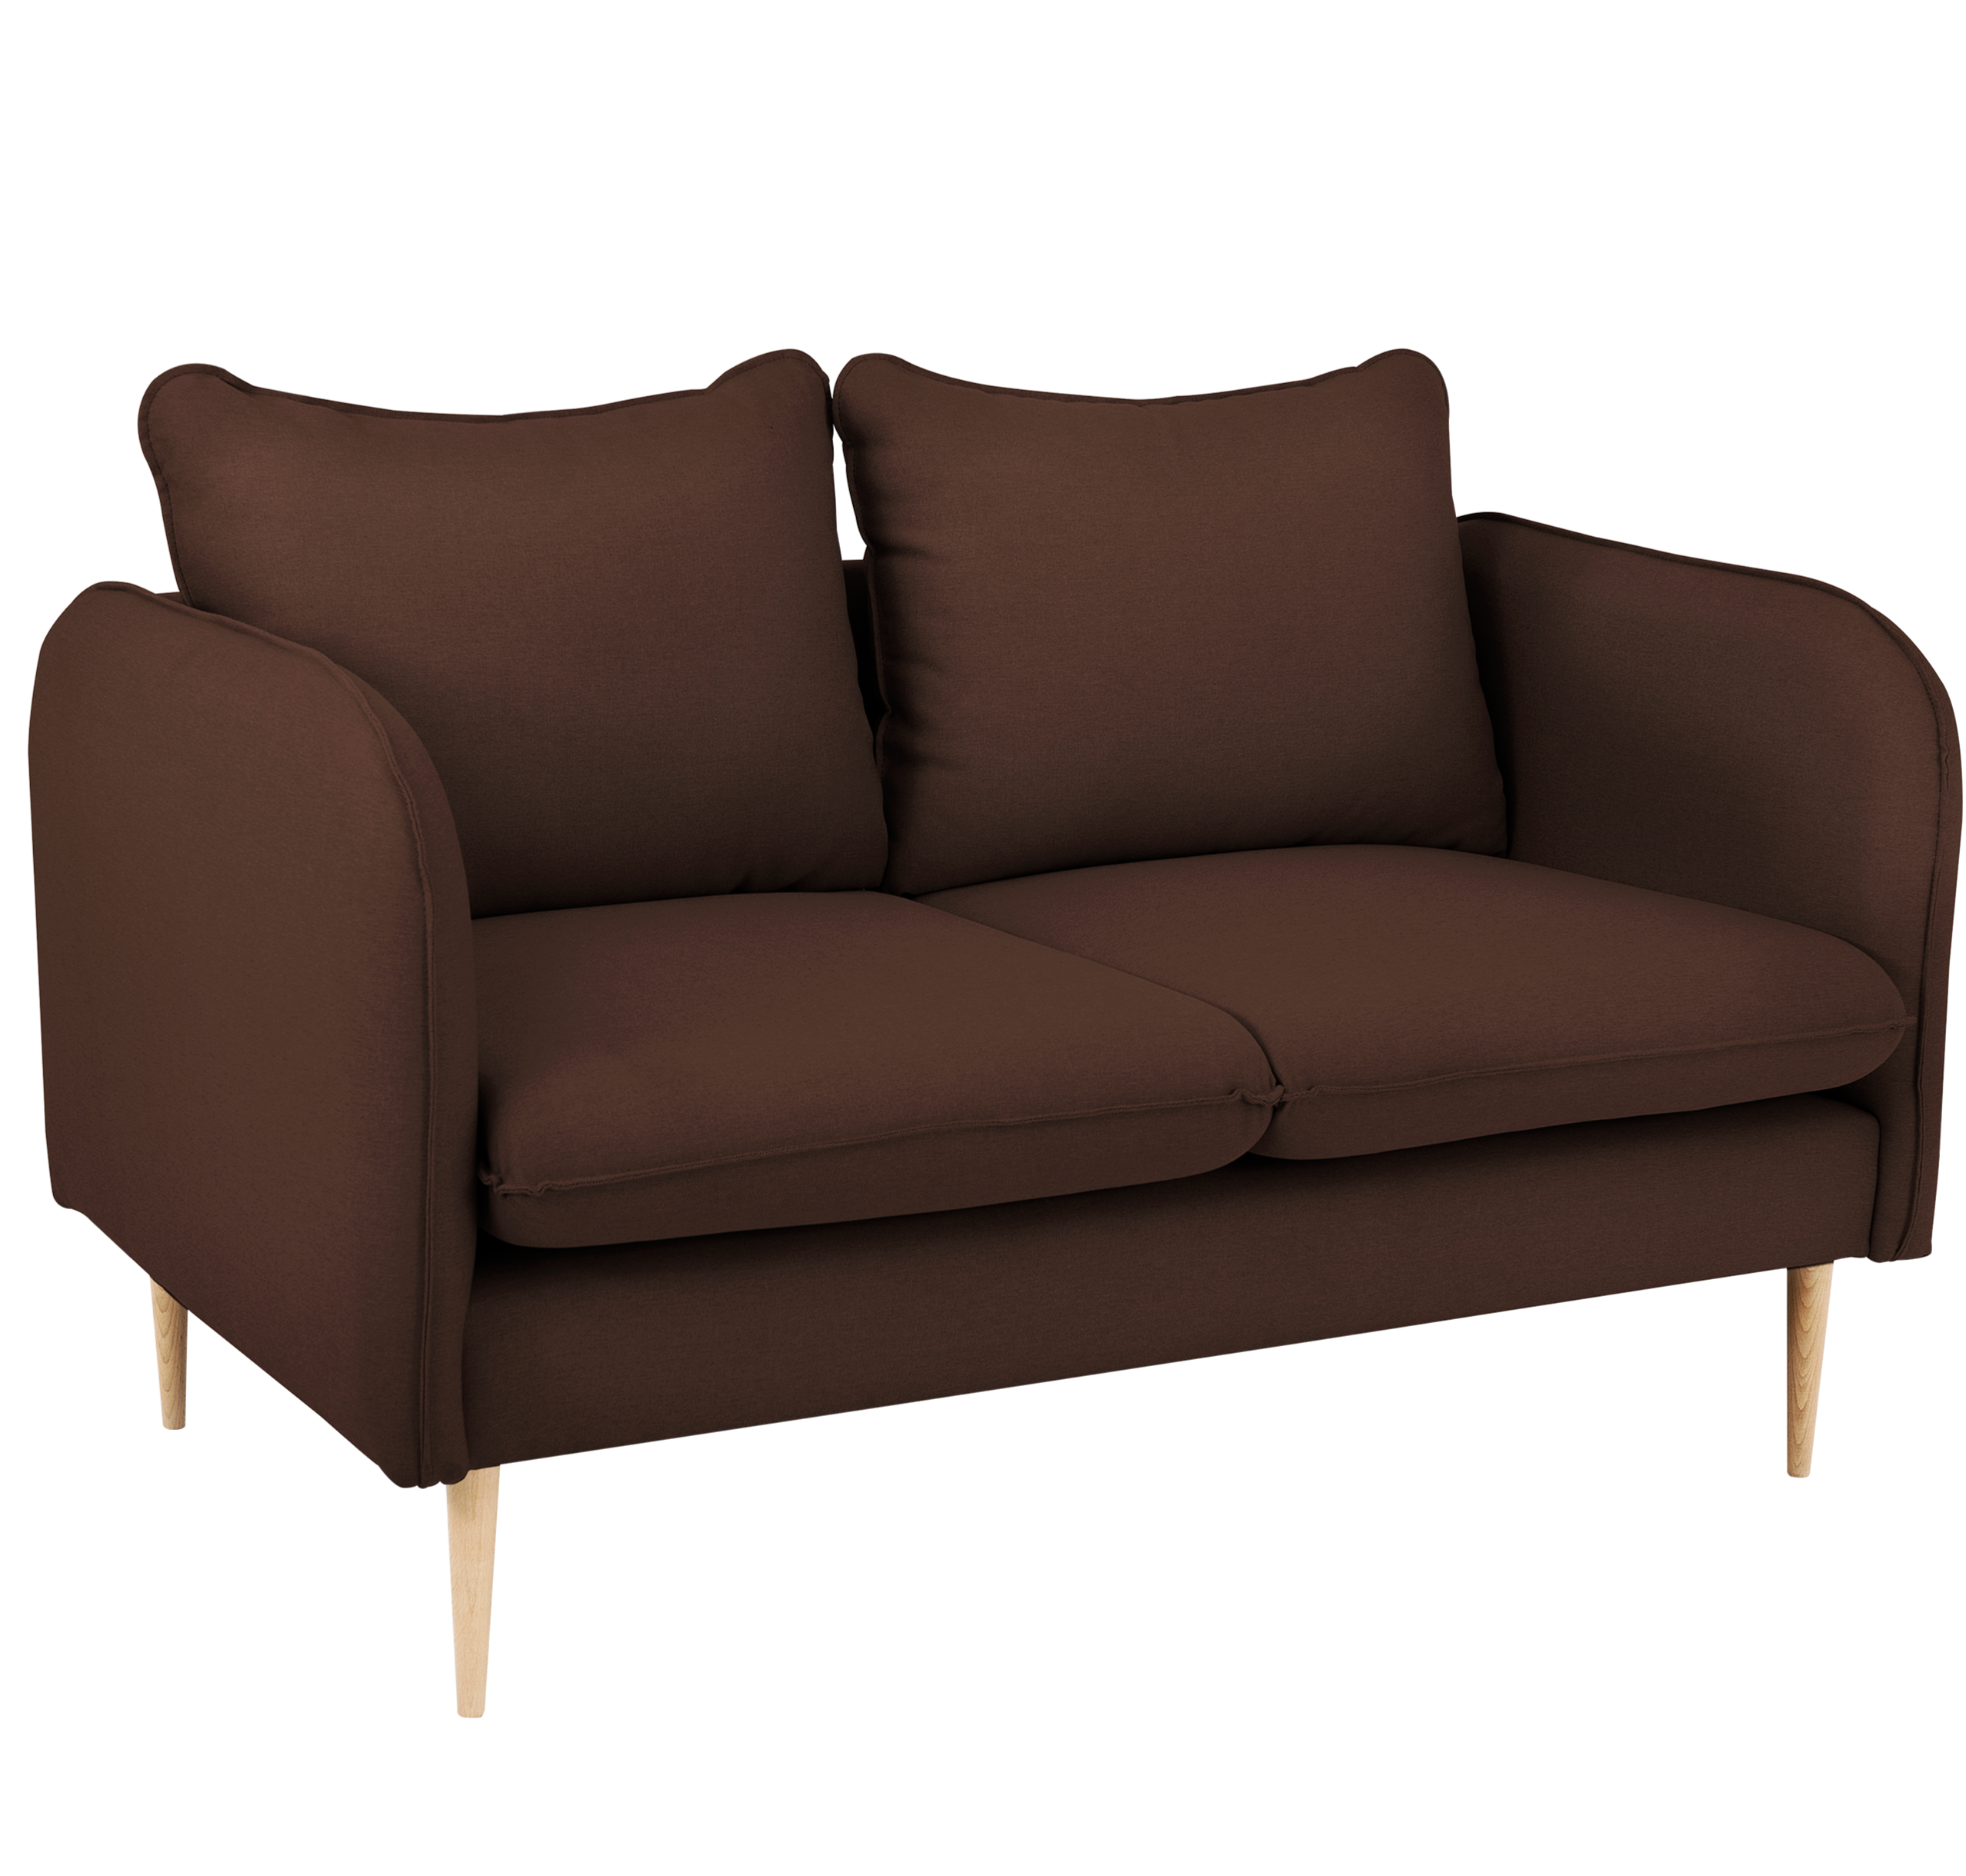 POSH WOOD Sofa 2 Seaters upholstery colour  brown